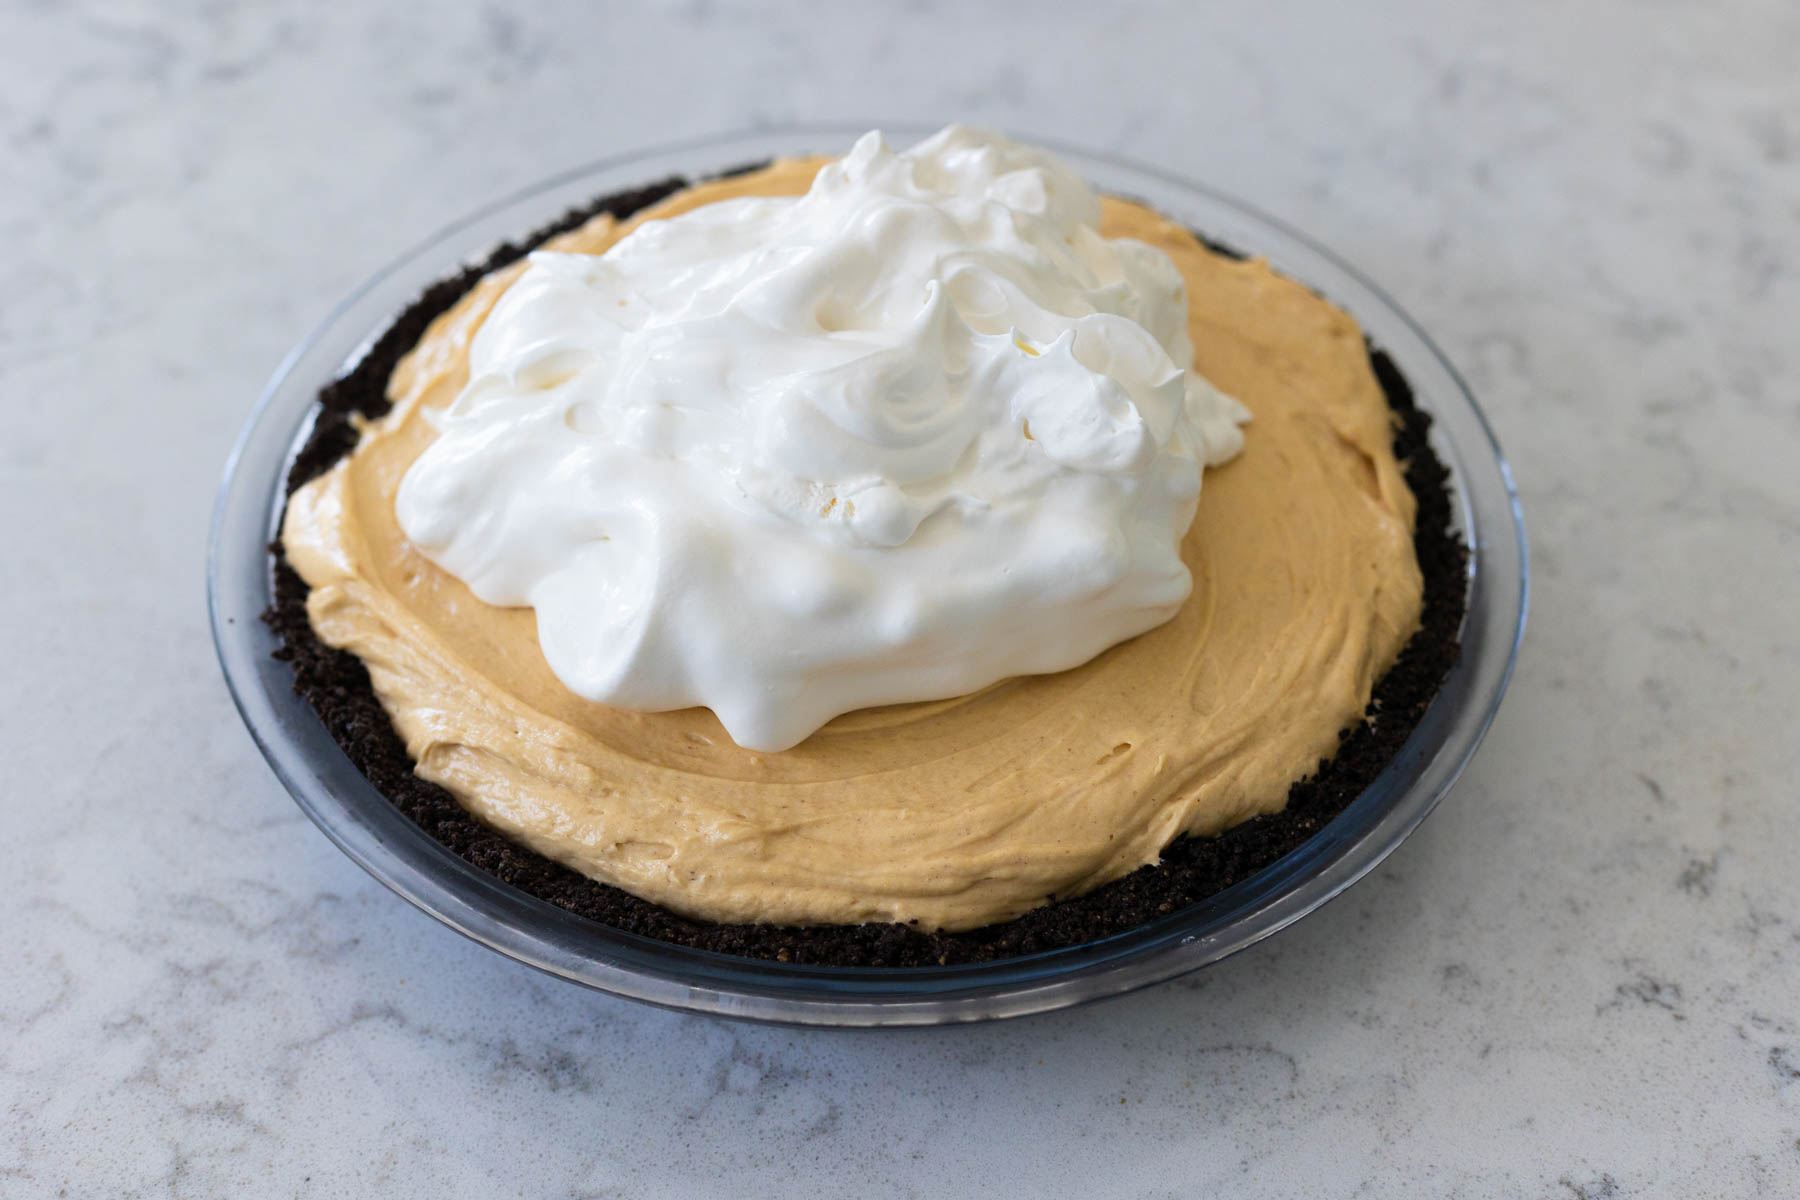 The whipped topping has been spooned over the peanut butter filling to frost the pie.